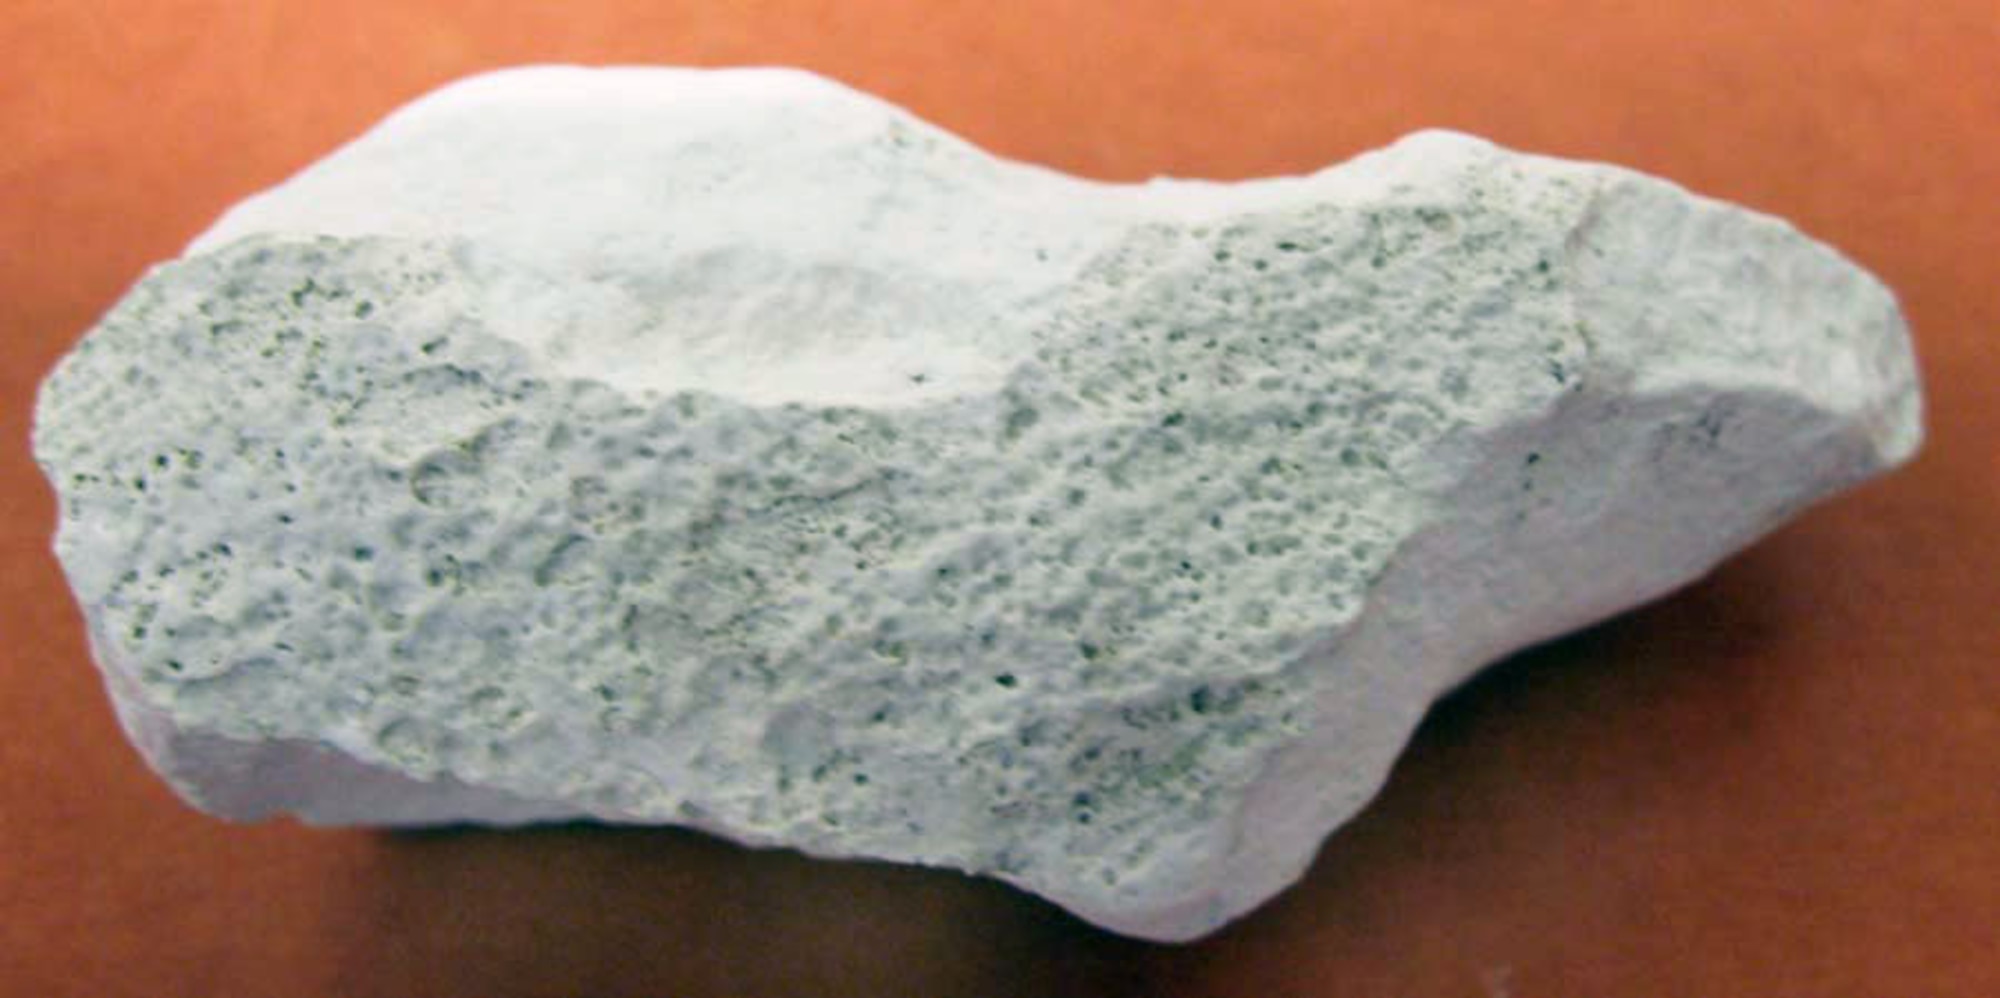 This piece of rock (chalk-calcium carbonate) came from the White Cliffs of Dover in Britain. This item belonged to Col. (Ret.) Robert K. Morgan, who was the pilot of the B-17F "Memphis Belle" and the B-29 "Dauntless Dotty." Col. Morgan served in the U.S. Air Force from 1941 until 1965. (U.S. Air Force photo)